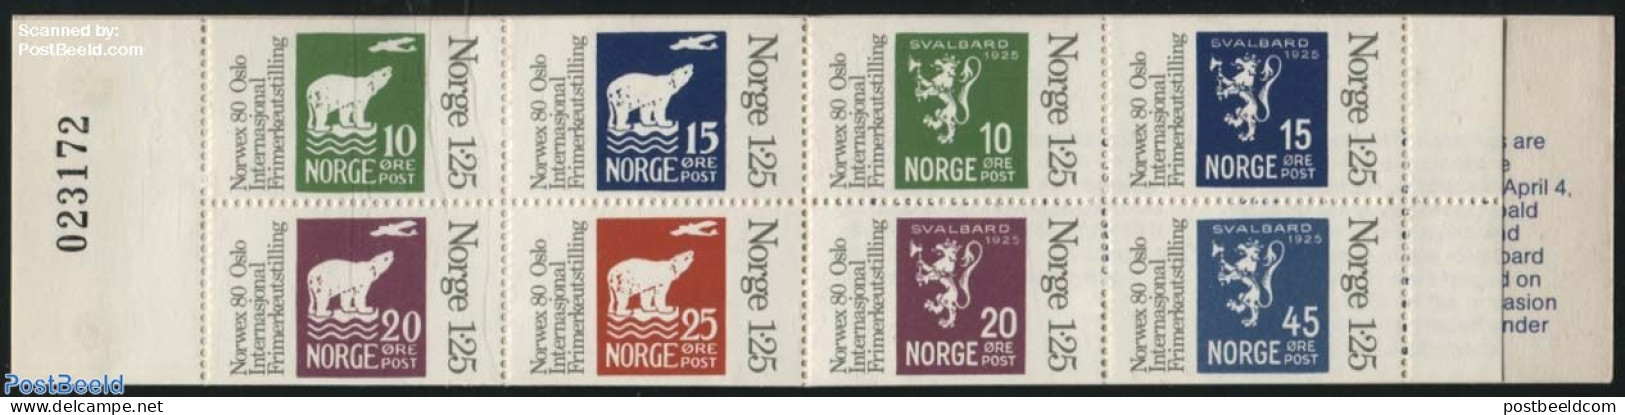 Norway 1978 Norwex 80 Booklet, Mint NH, Stamp Booklets - Stamps On Stamps - Unused Stamps